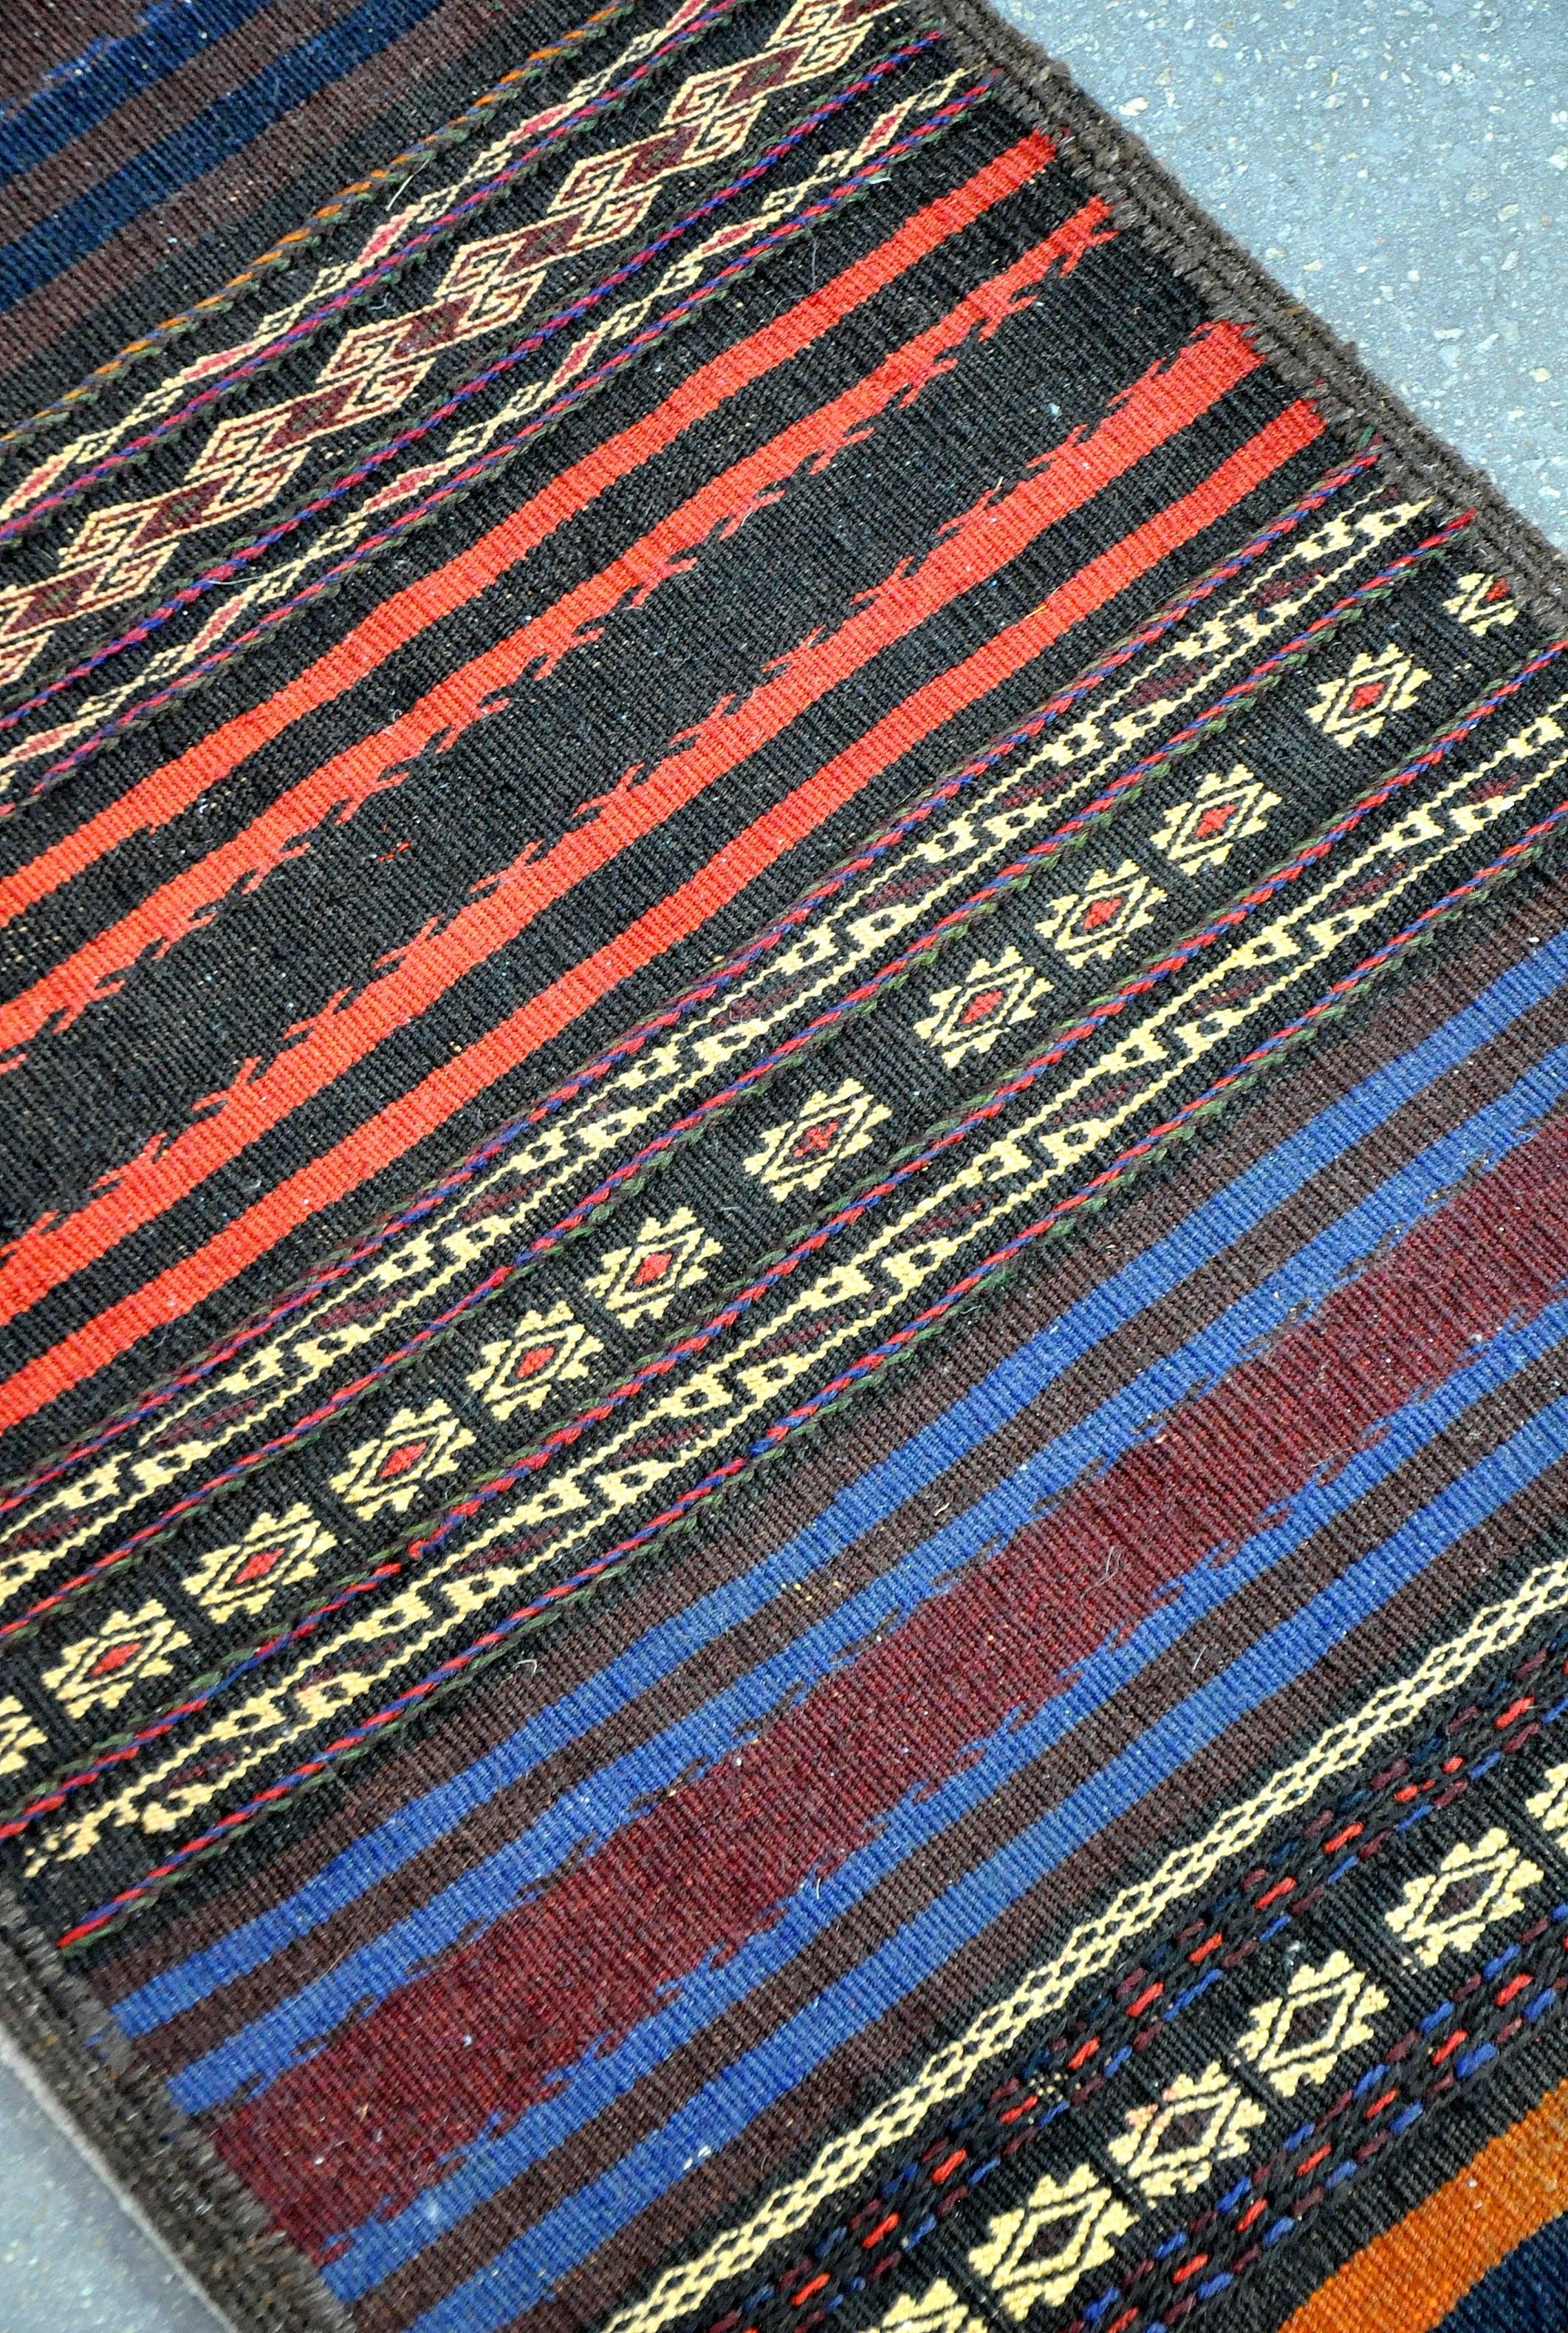 A beautiful vintage handwoven Kilim rug made of vegetable dyed hand spun wool. Vibrant red and blue stripes alternate with geometric designs on a black and brown background. Looks fabulous with Danish or Scandinavian Modern interiors.